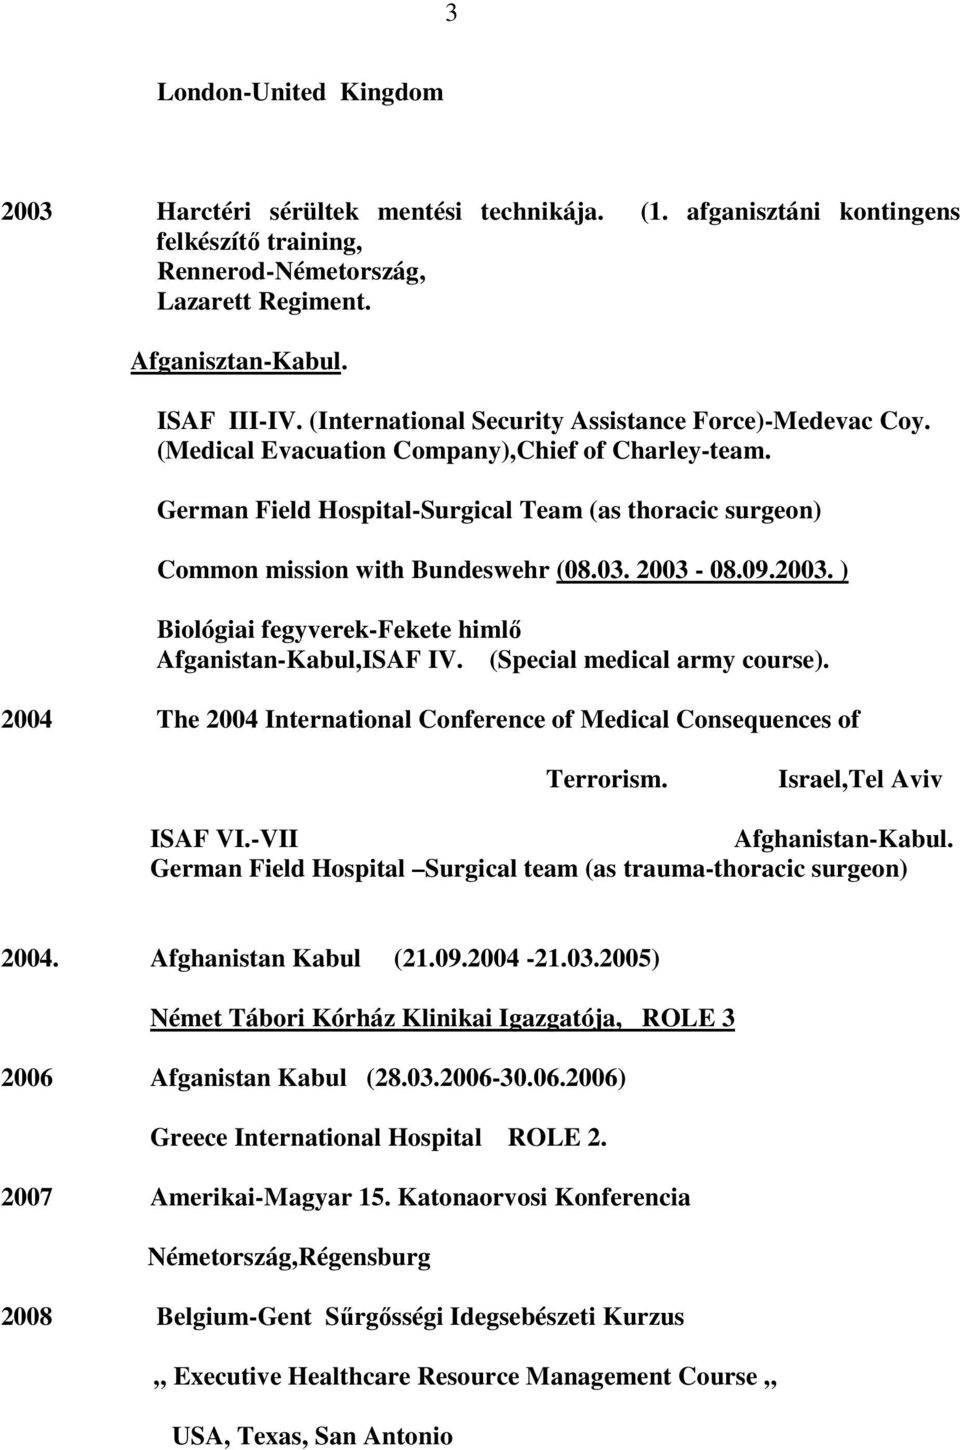 03. 2003-08.09.2003. ) Biológiai fegyverek-fekete himlı Afganistan-Kabul,ISAF IV. (Special medical army course). 2004 The 2004 International Conference of Medical Consequences of Terrorism.